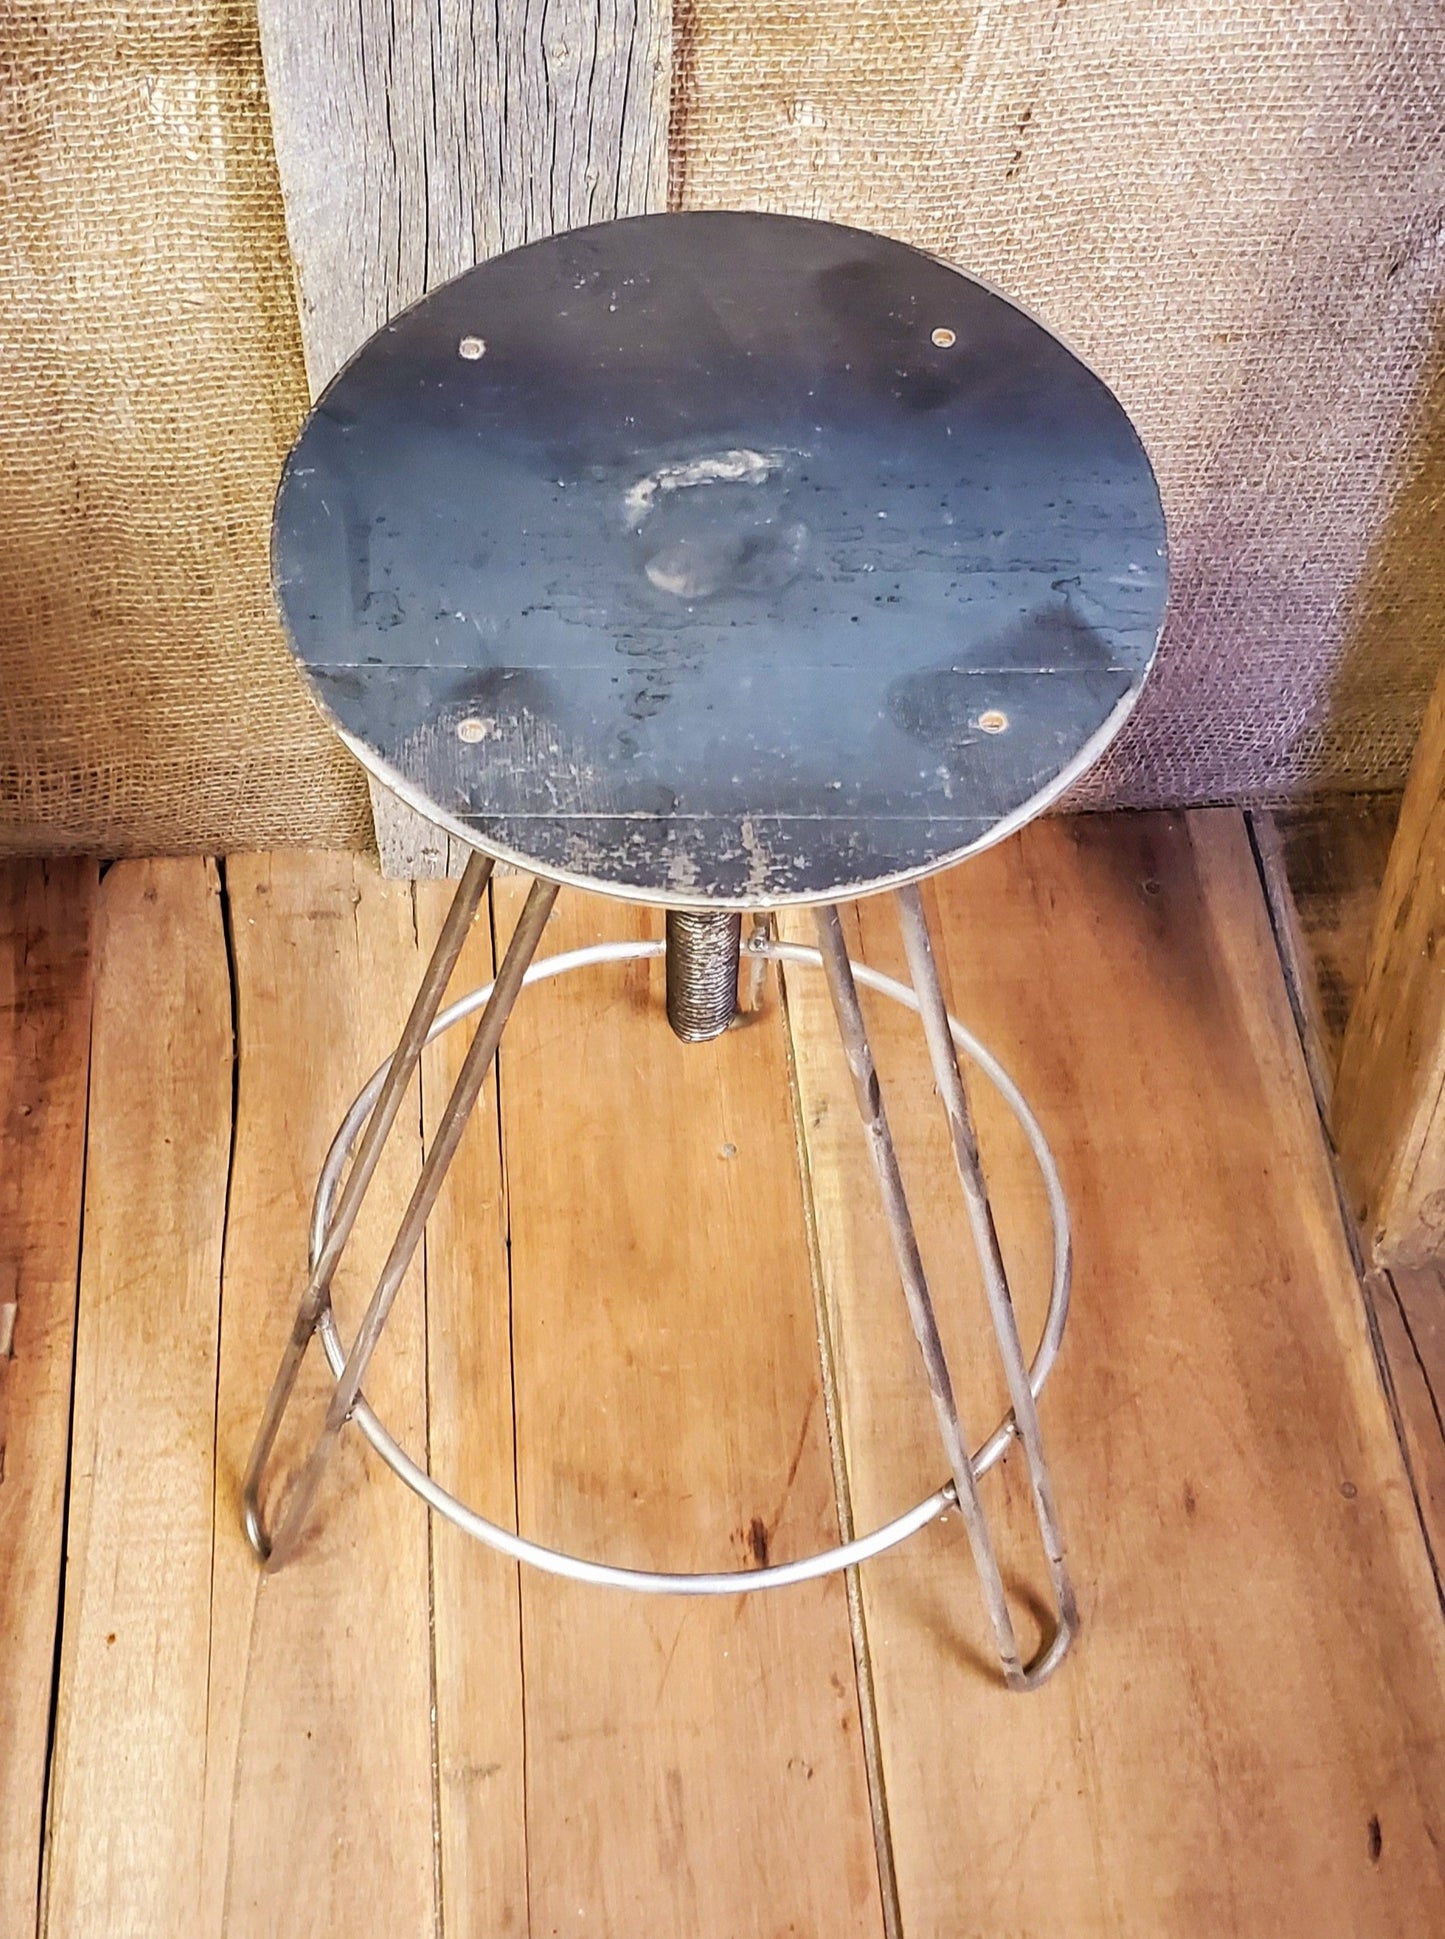 The 'Hairpin Leg' Stool - Adjustable Height Swivel Stool (No Top) - Spearhead Collection - Stools - Hairpin Legs, Hardware, Seating, Steel